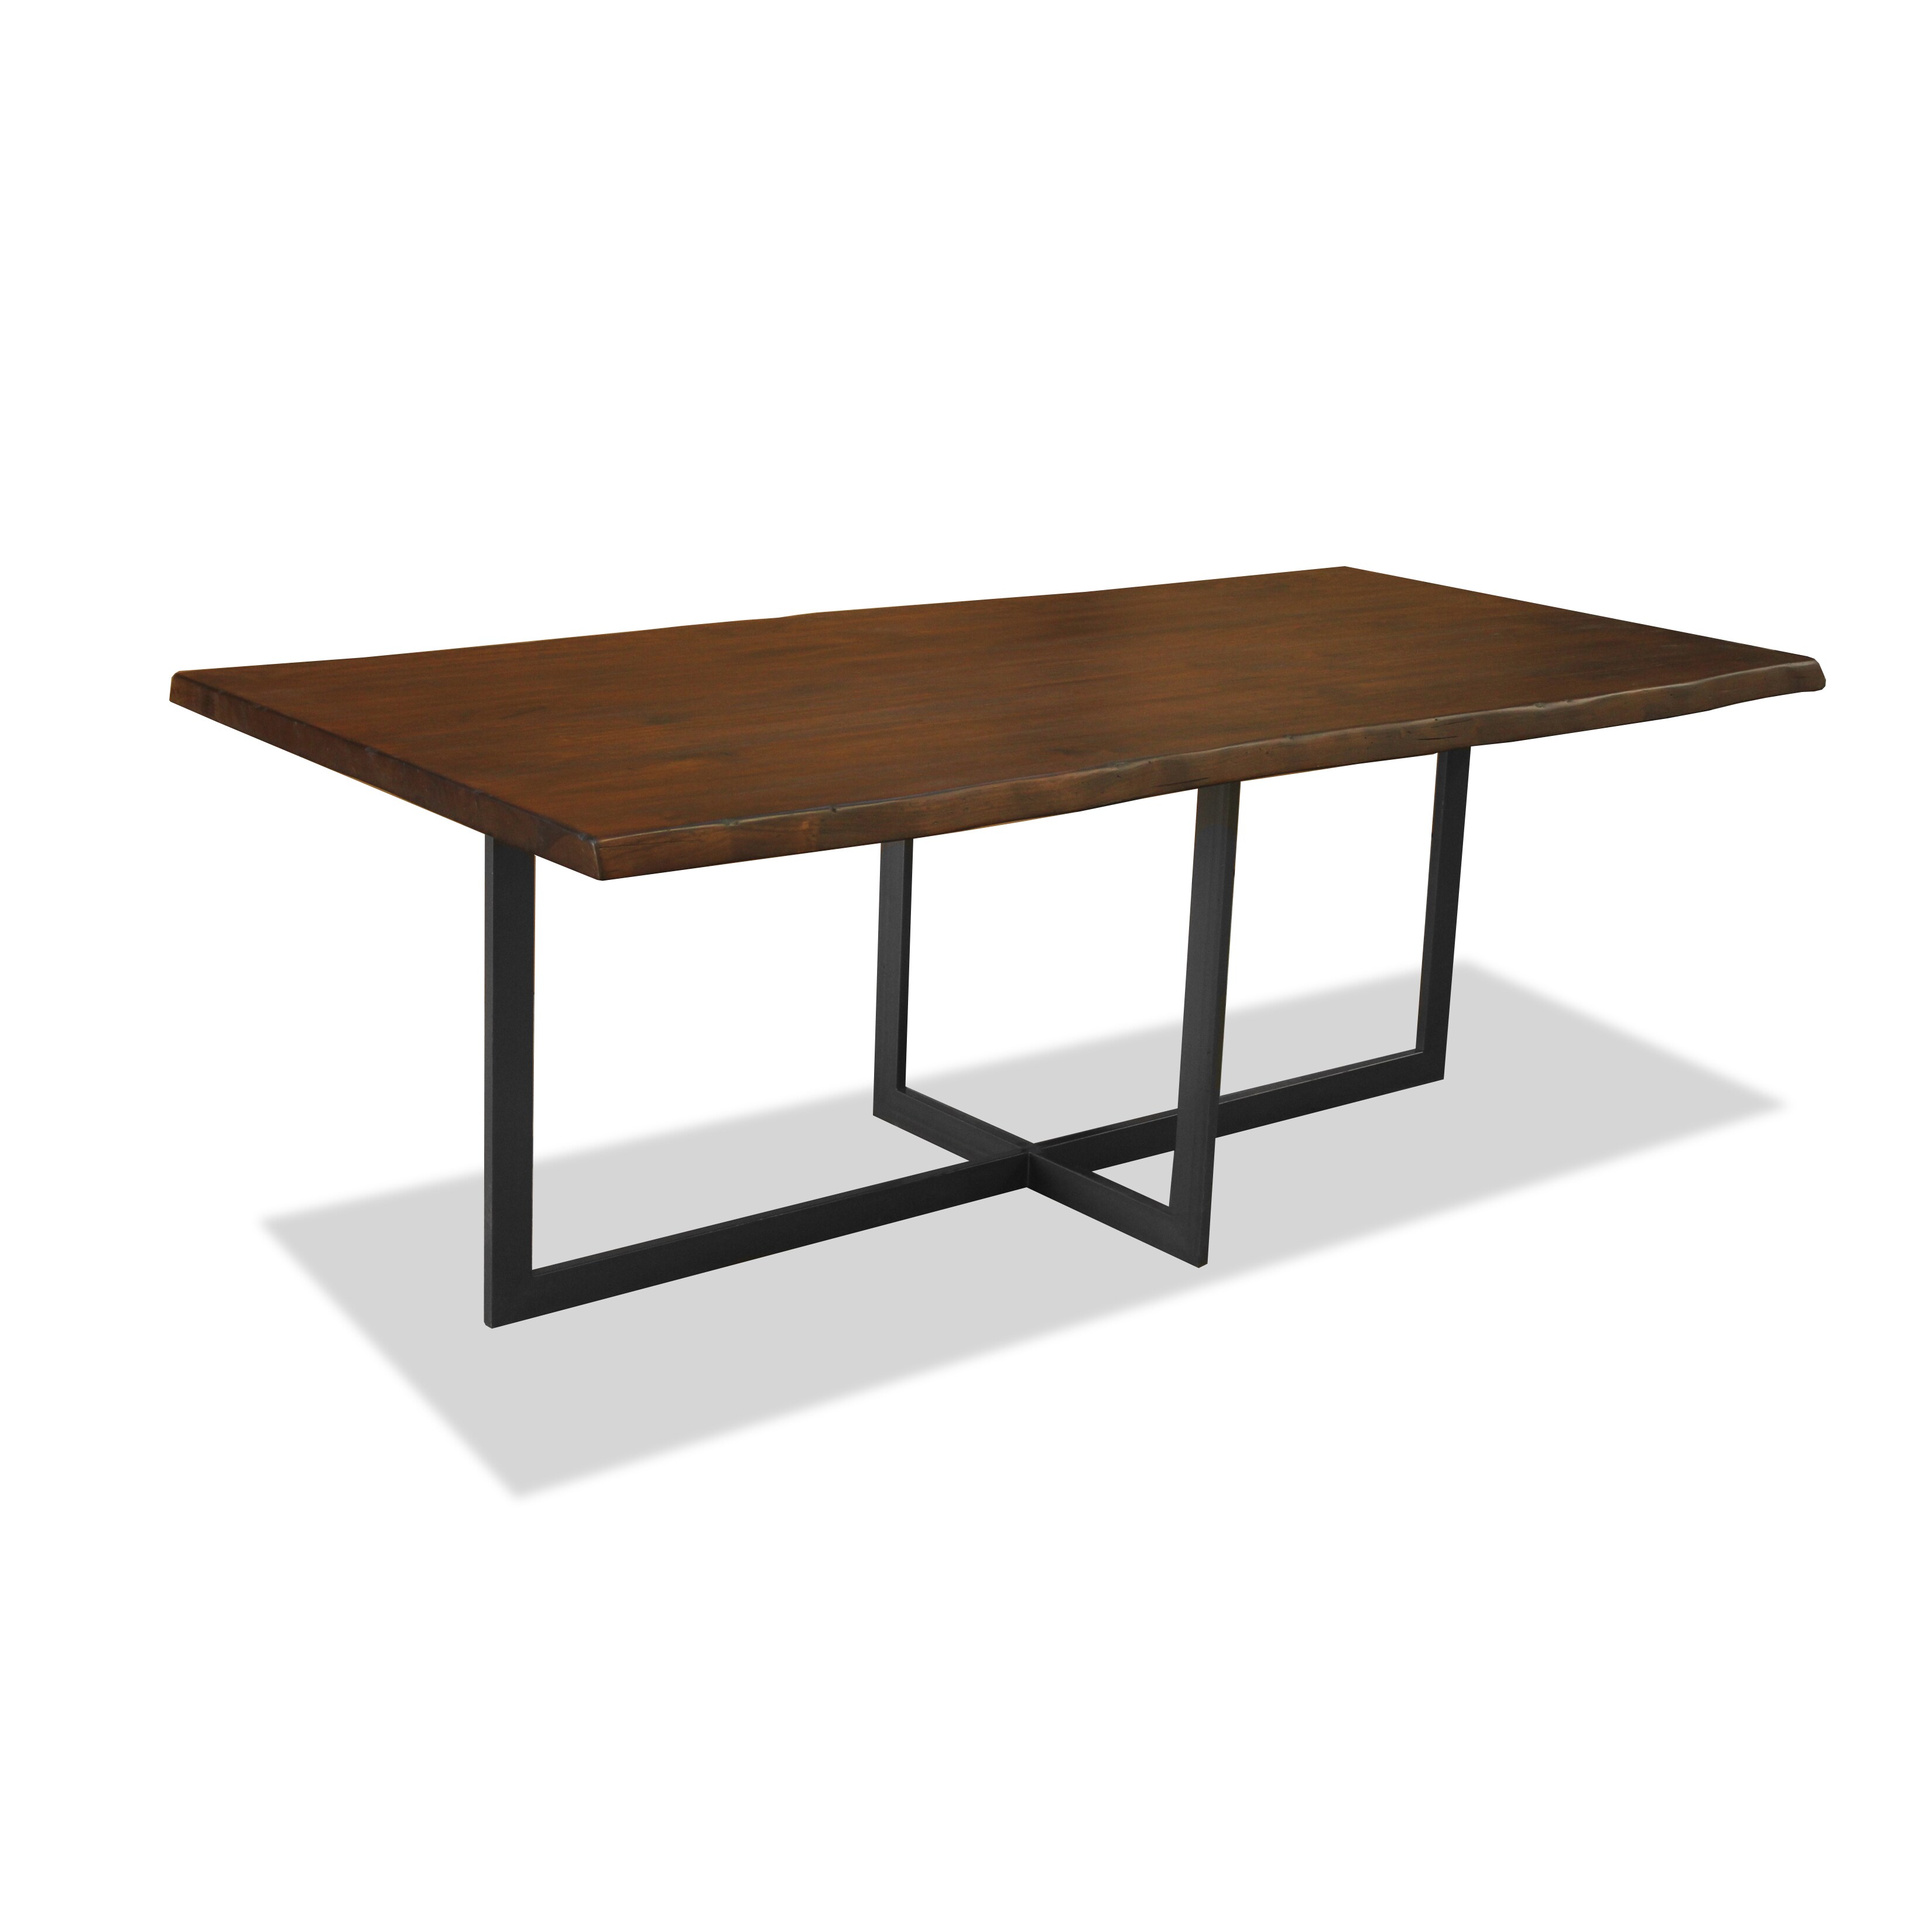 kitchen and dining room tables expresso